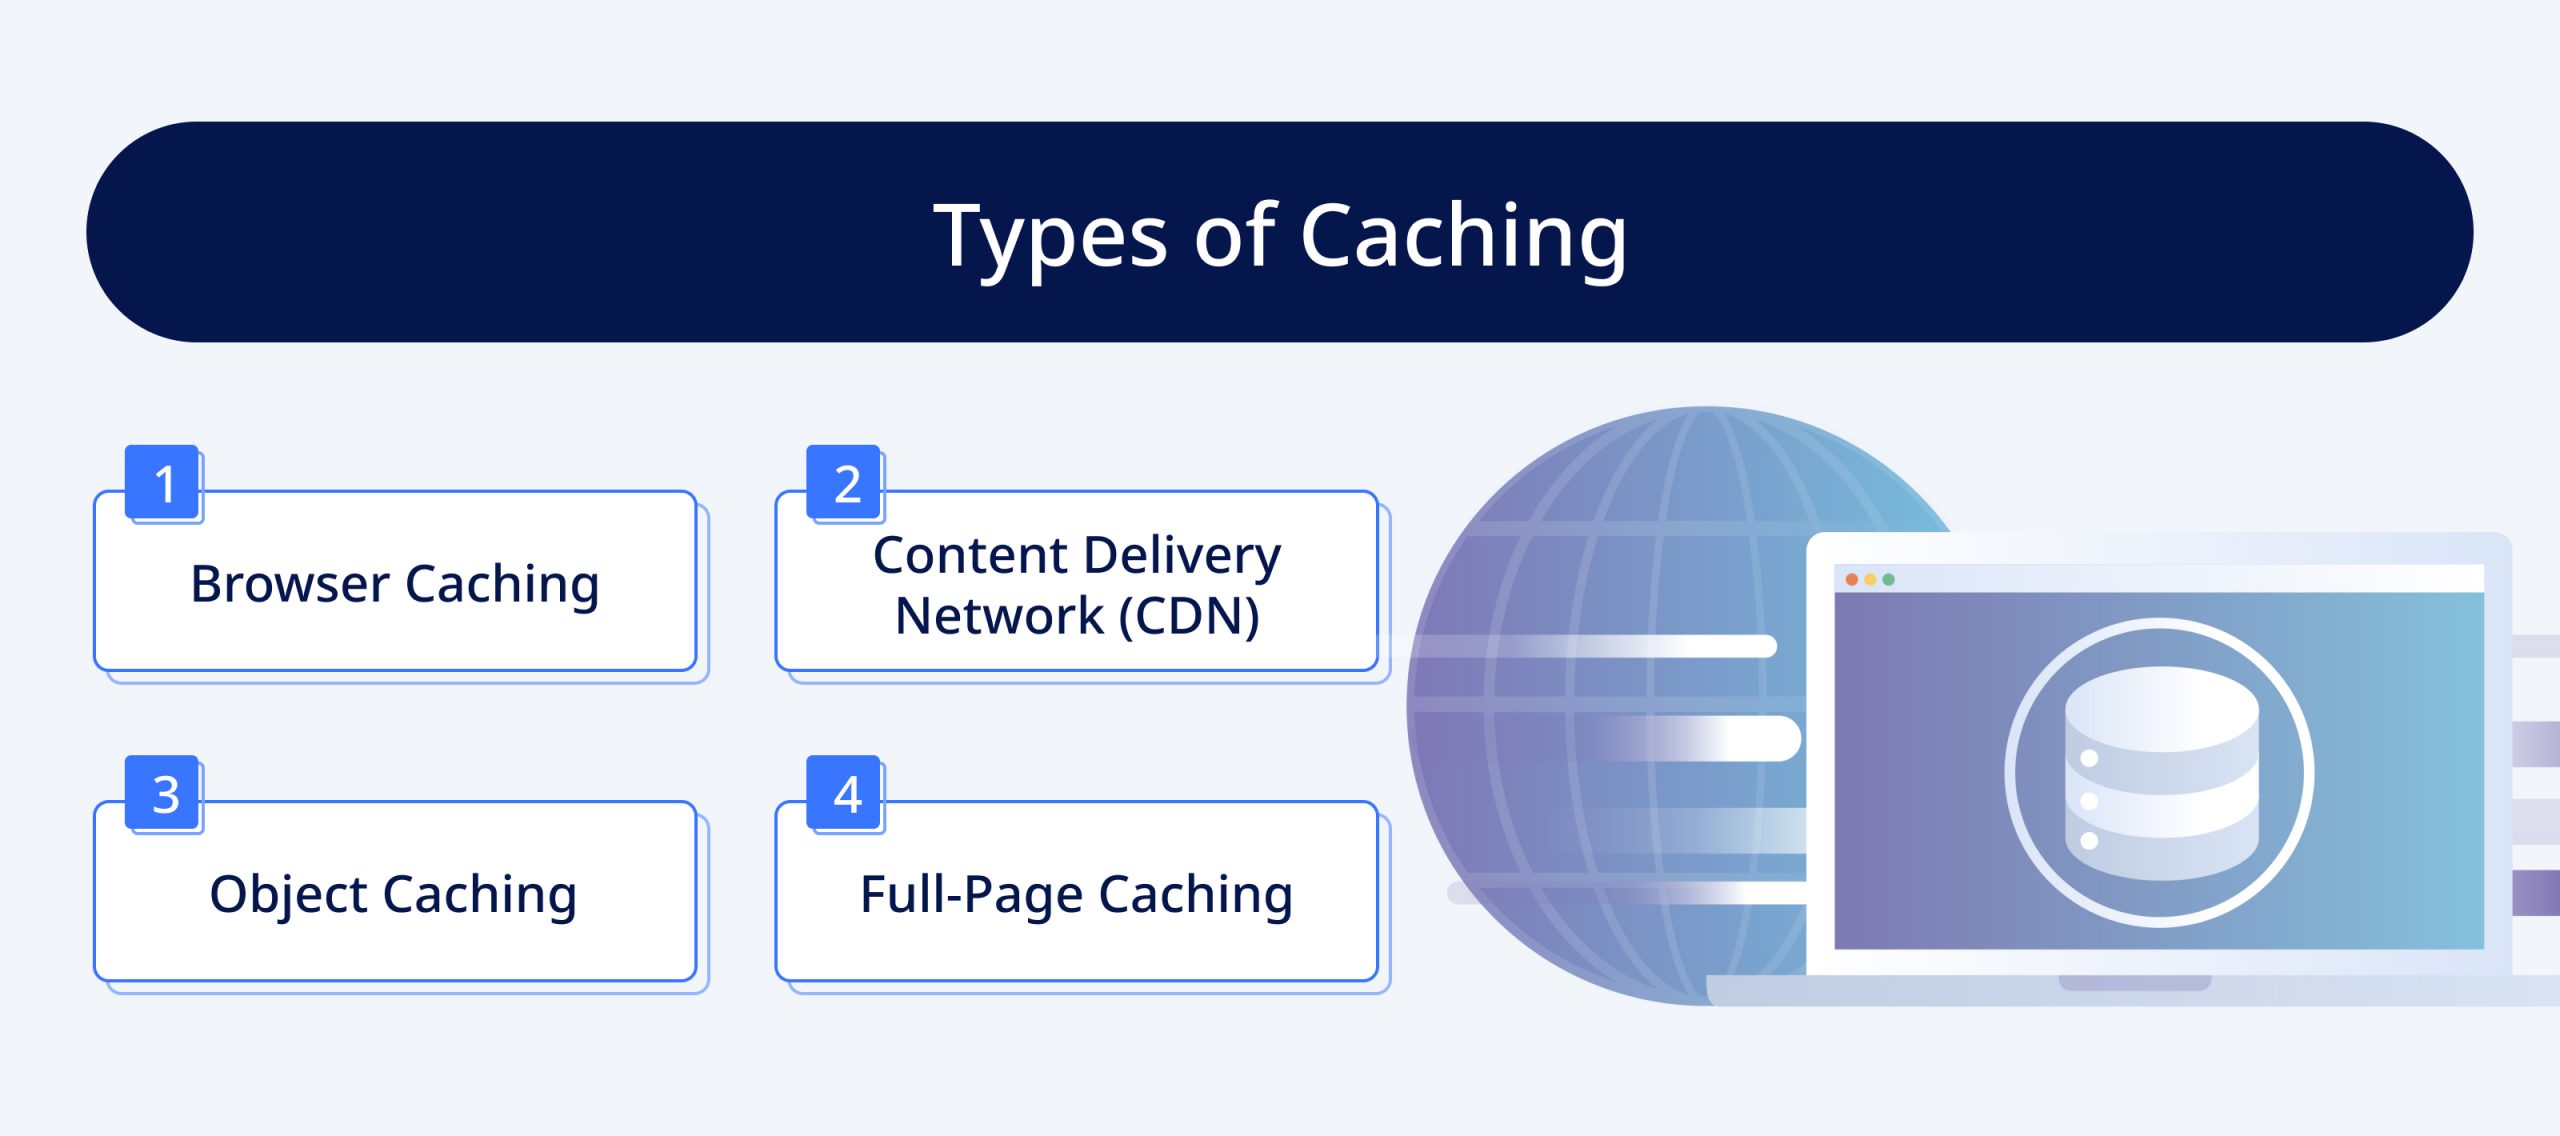 Types of Caching